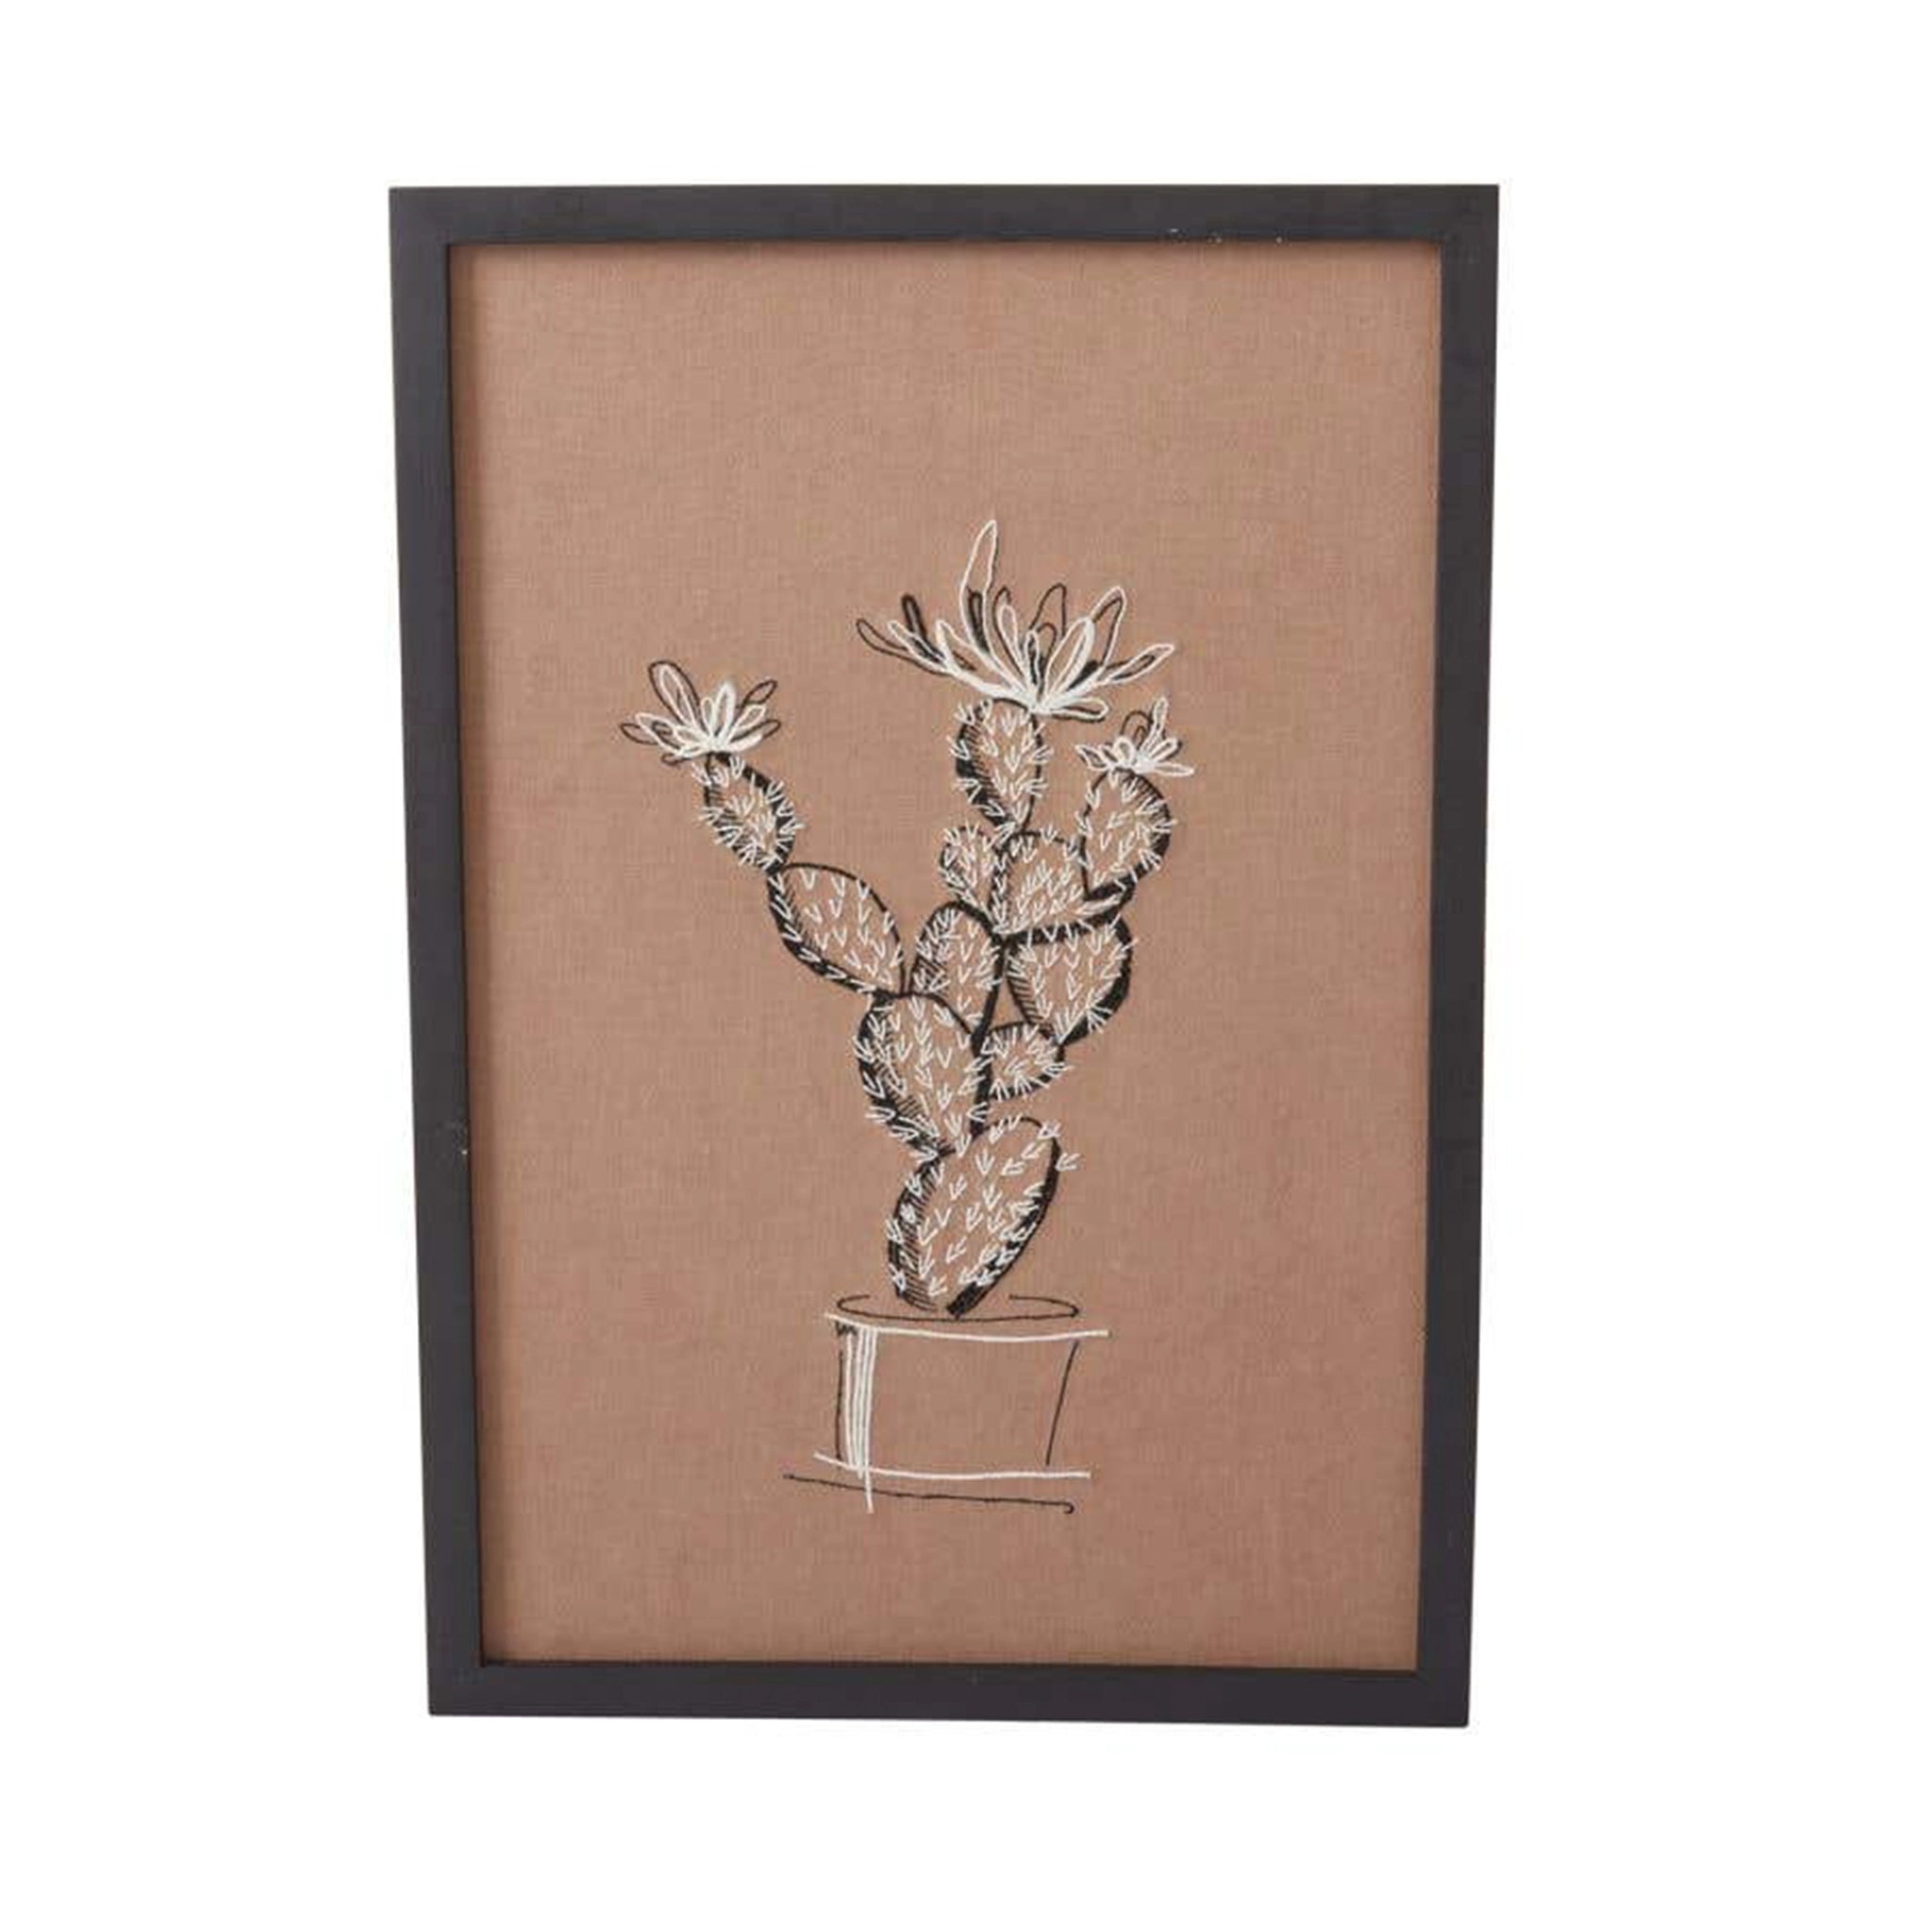 On a white background is a brown piece of wall art with white and black stitching of a cactus in a pot. The art comes in a simple black frame. 